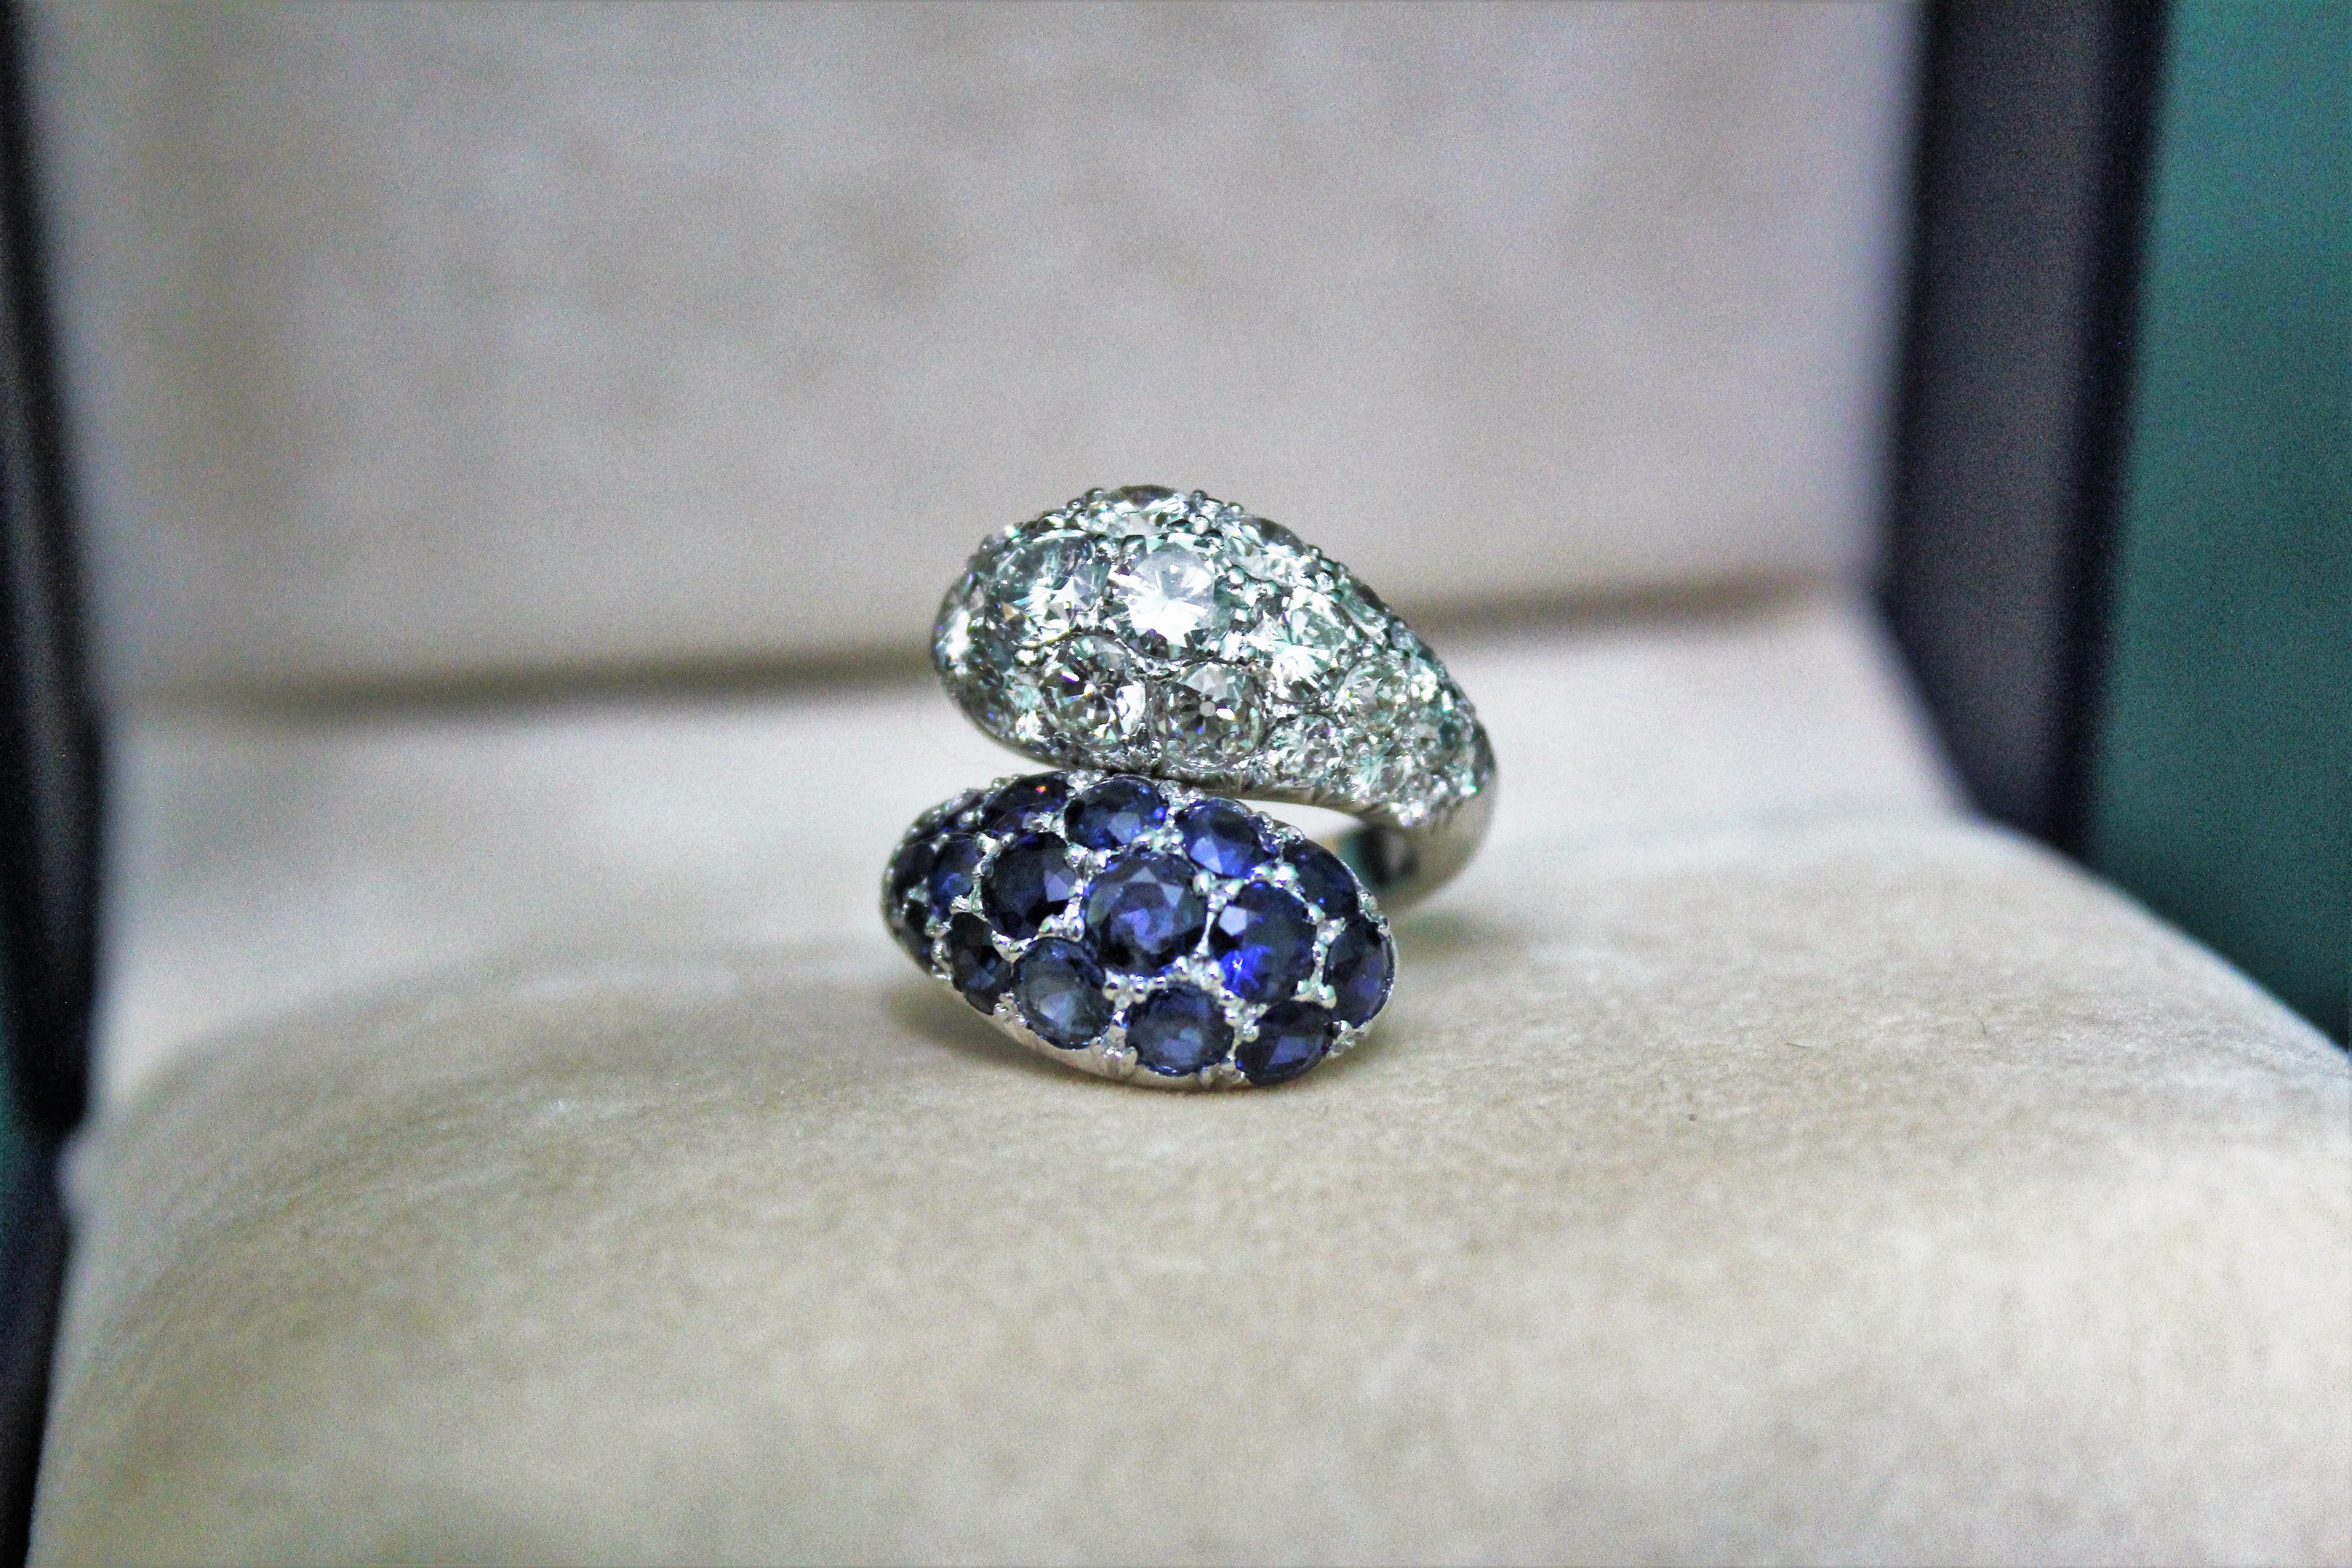 Beautiful and colourful white gold ring.
It has 2.30 ct of blue sapphires and 2.34 ct of diamonds G colour, vvs purity.
Weight: 13.10 grams
Italian made. 18K gold. 1990s circa